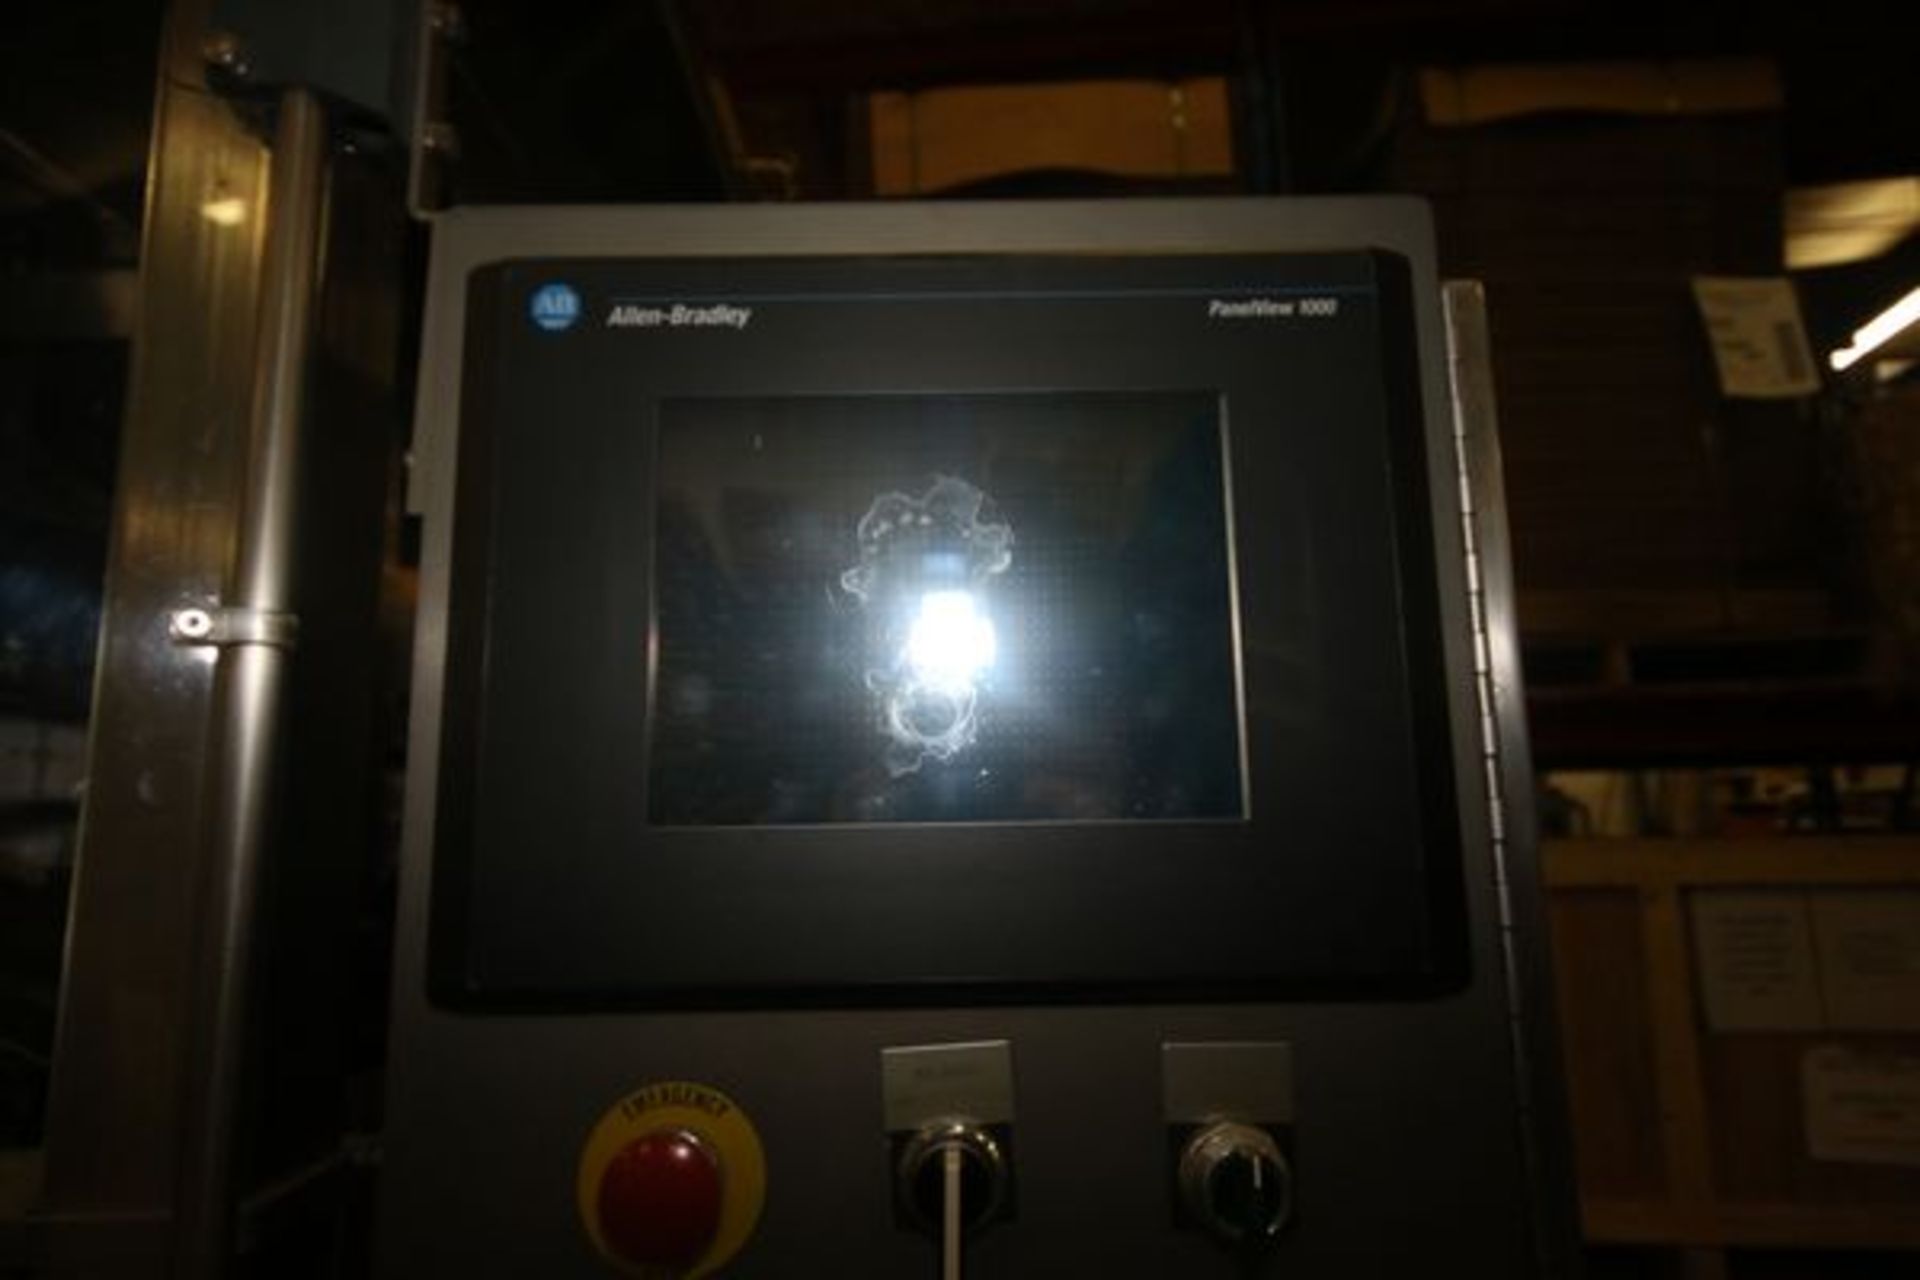 Triangle Bagger, M/N B65PF4F, S/N 120281, 230 Volts, 1 Phase, with Allen-Bradley 13-Slot PLC, - Image 5 of 7